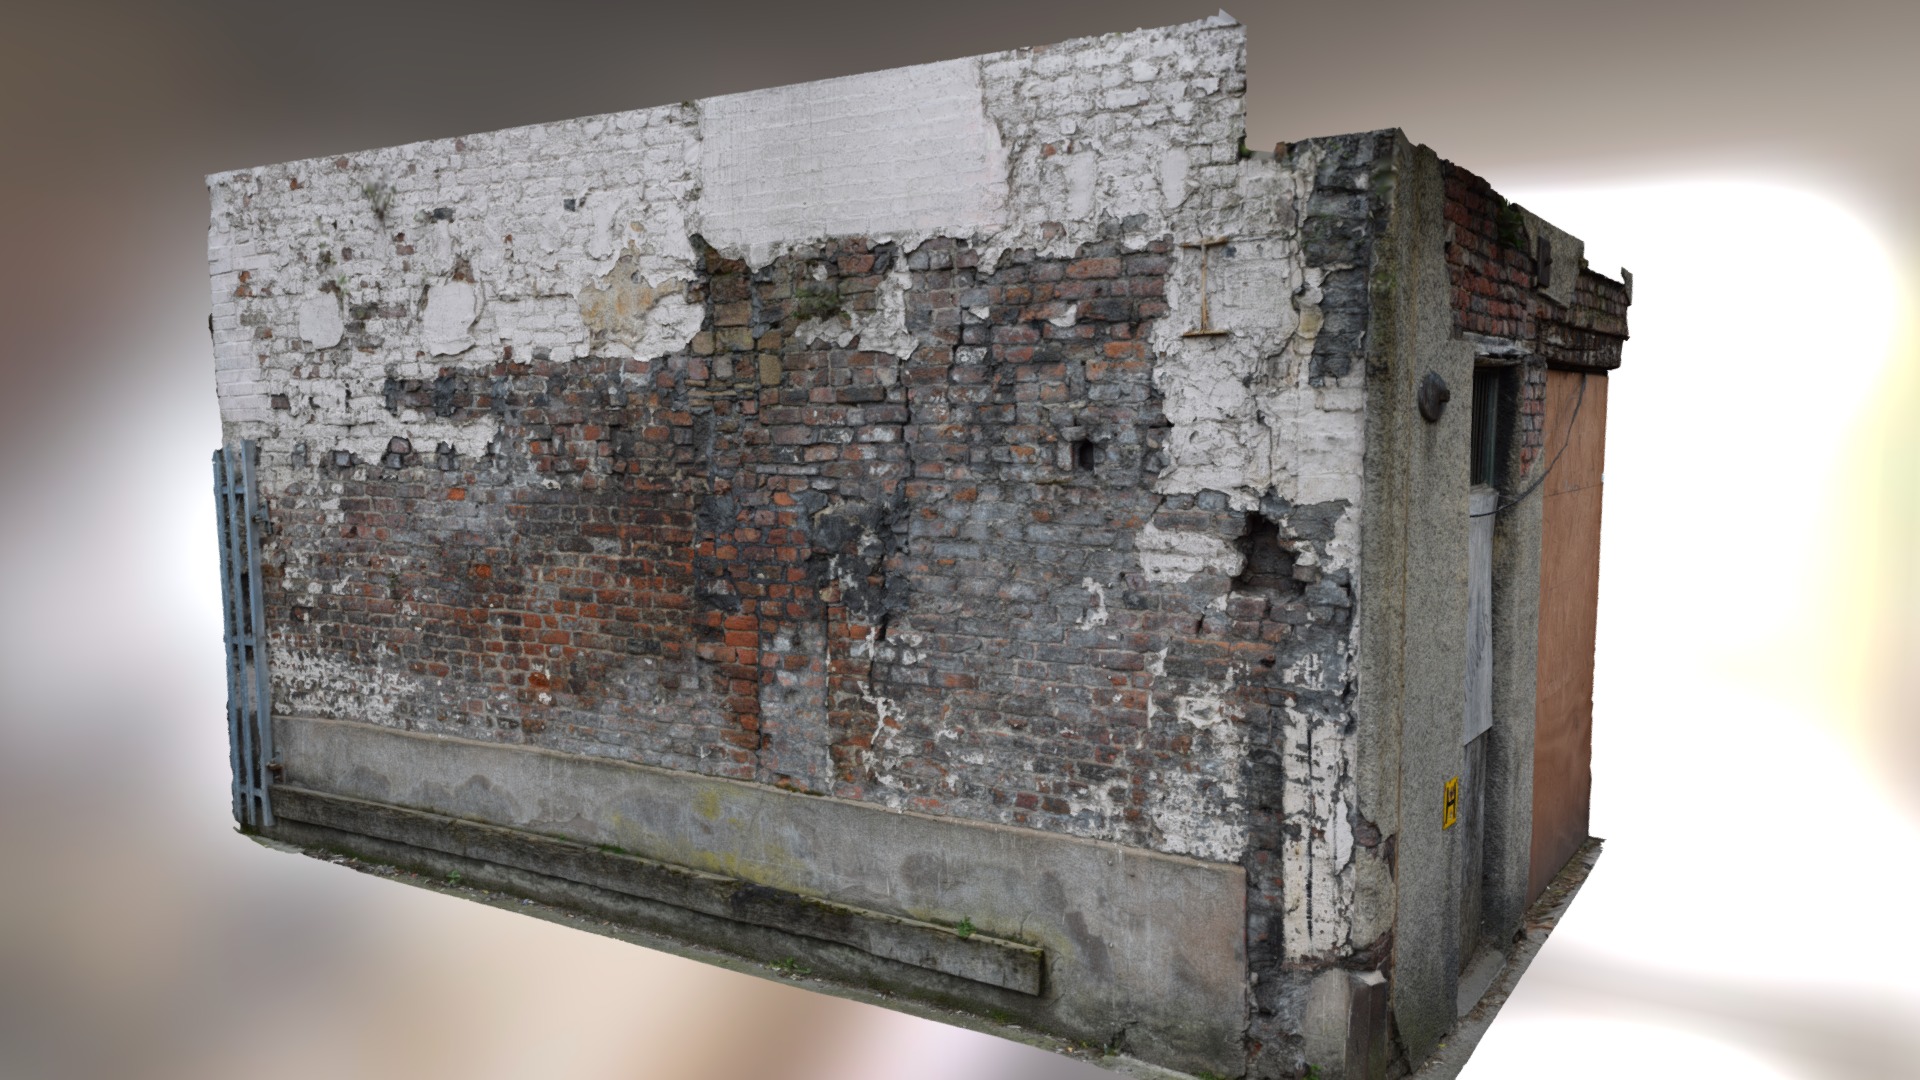 3D model Derelict Wall Scan - This is a 3D model of the Derelict Wall Scan. The 3D model is about a stone wall with a hole in it.